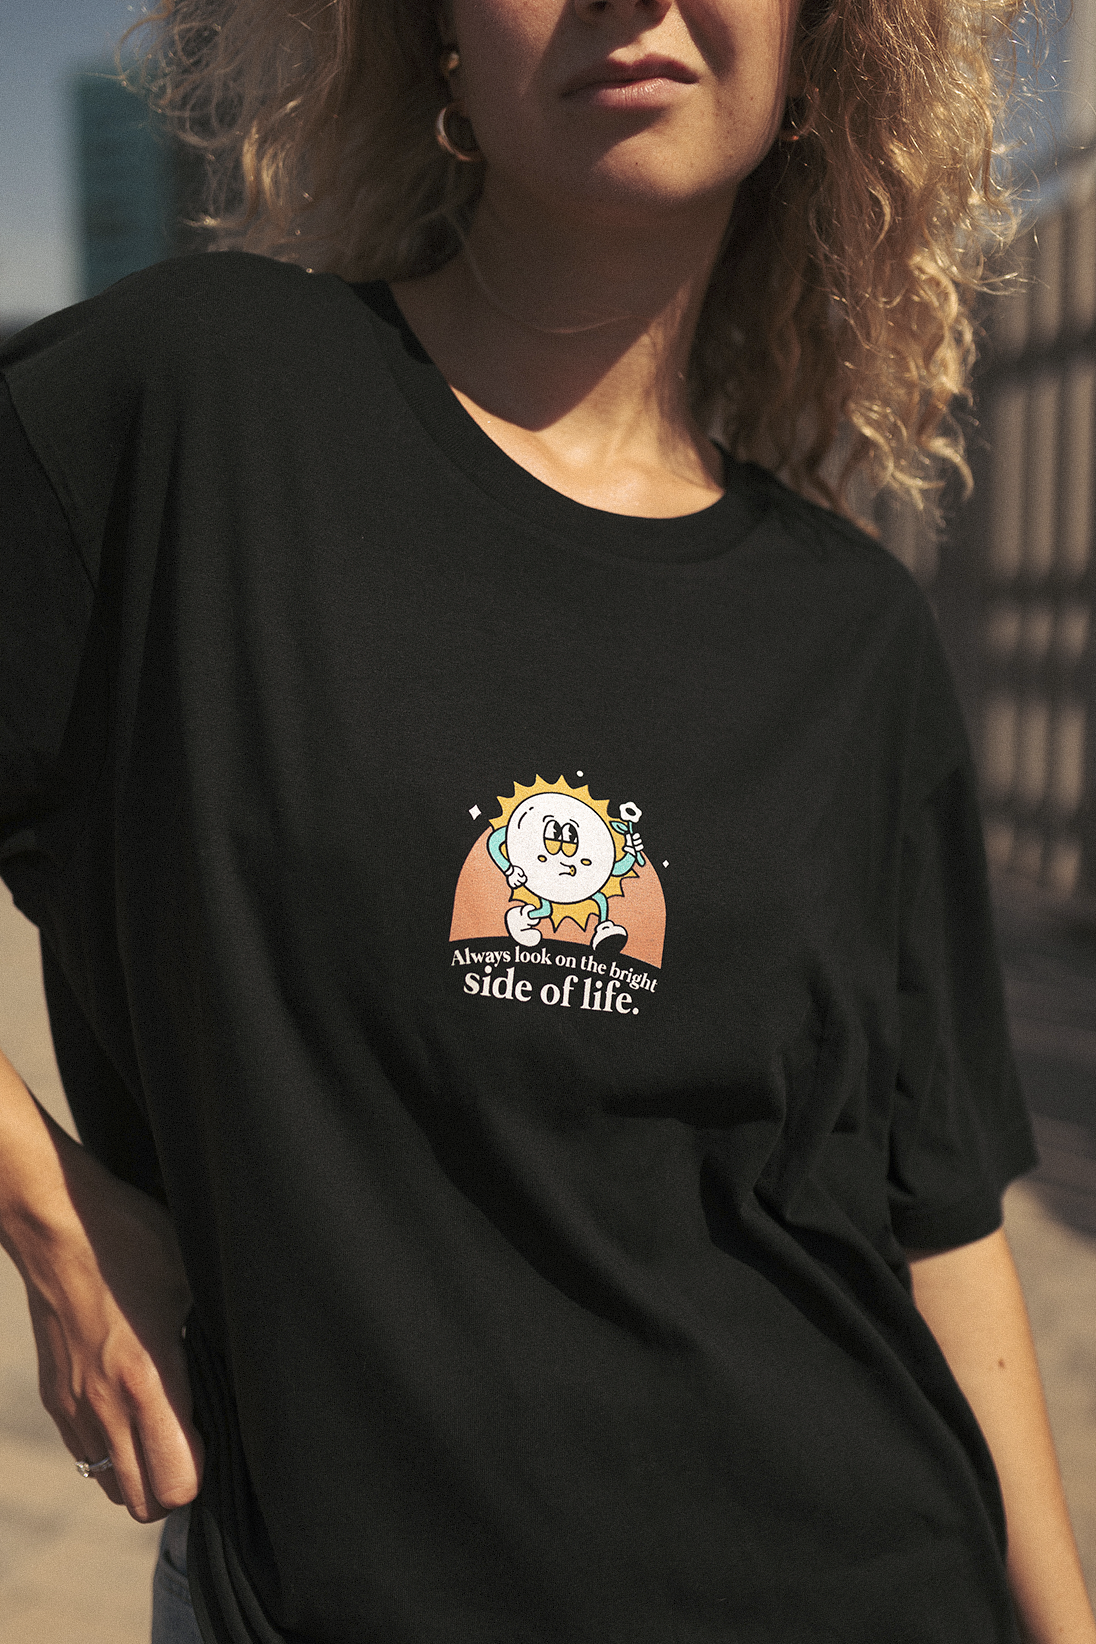 Always look on the bright side of life | Black Tee